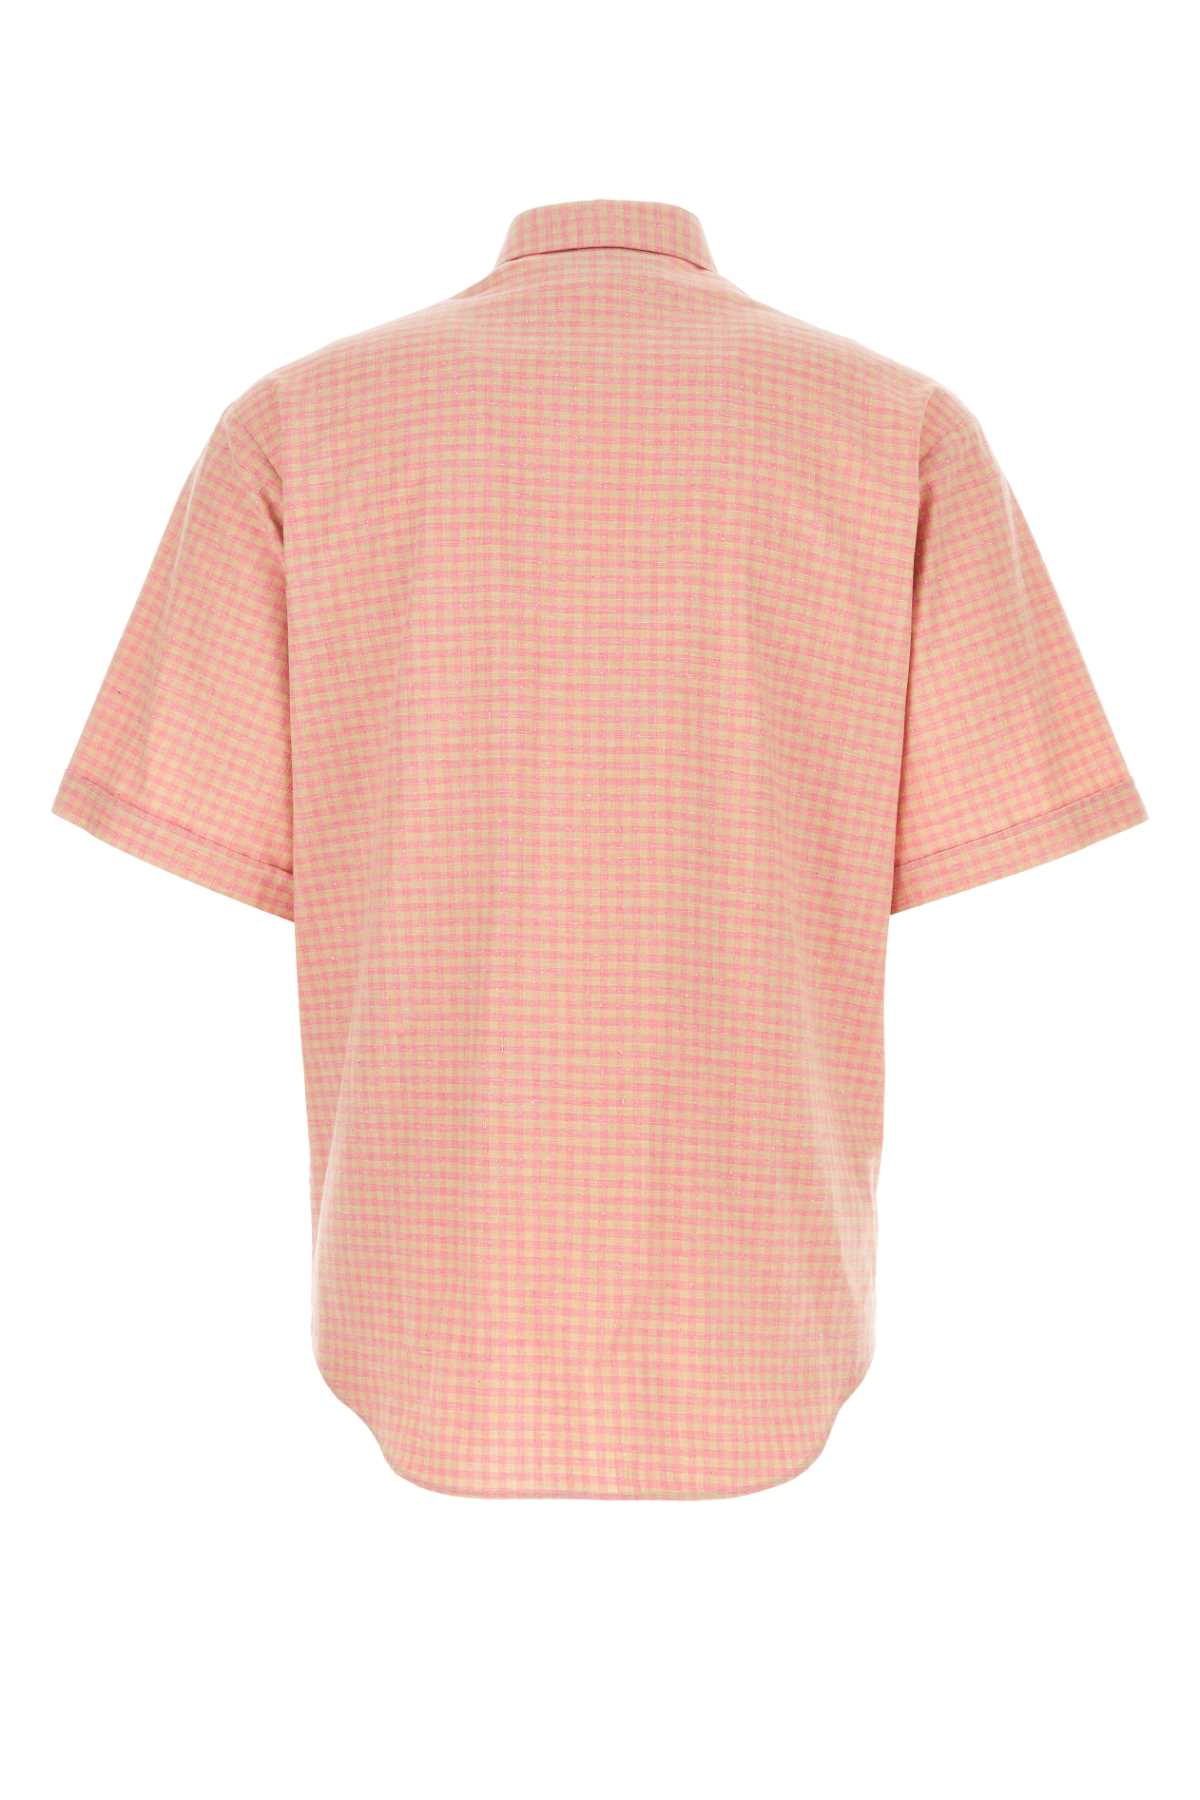 Shop Gucci Embroidered Cotton Shirt In Pink/beige/mix